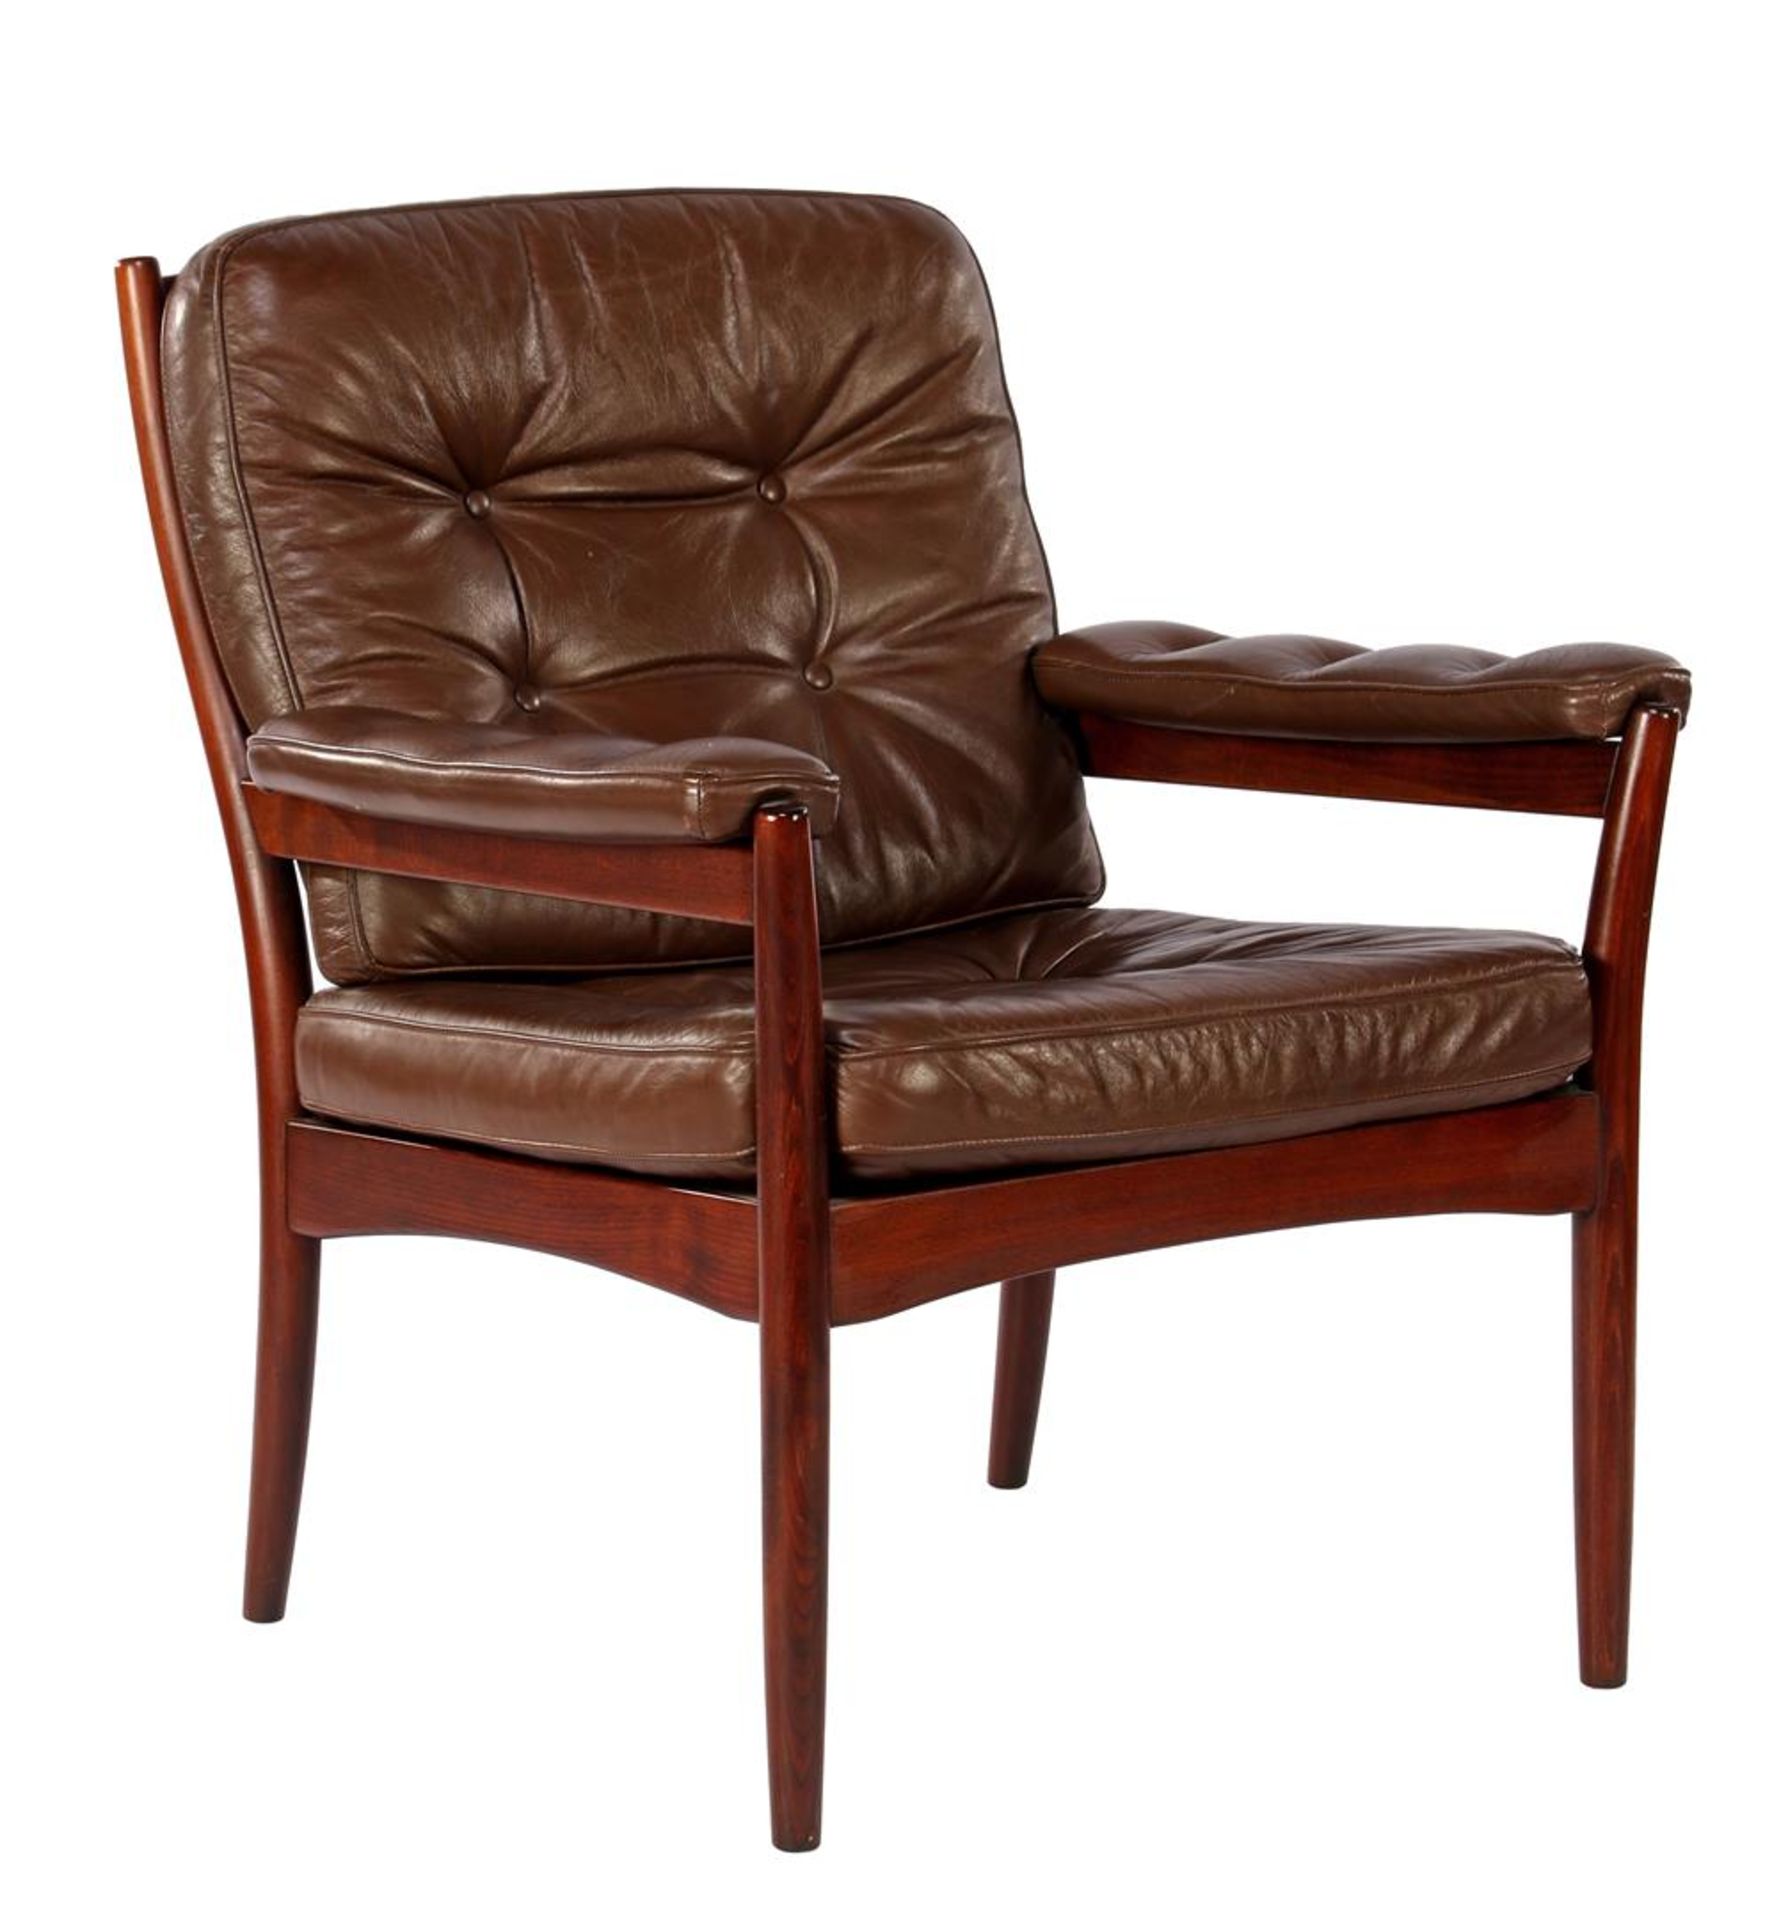 Teak arm chair with brown leather padded (arm) cushions